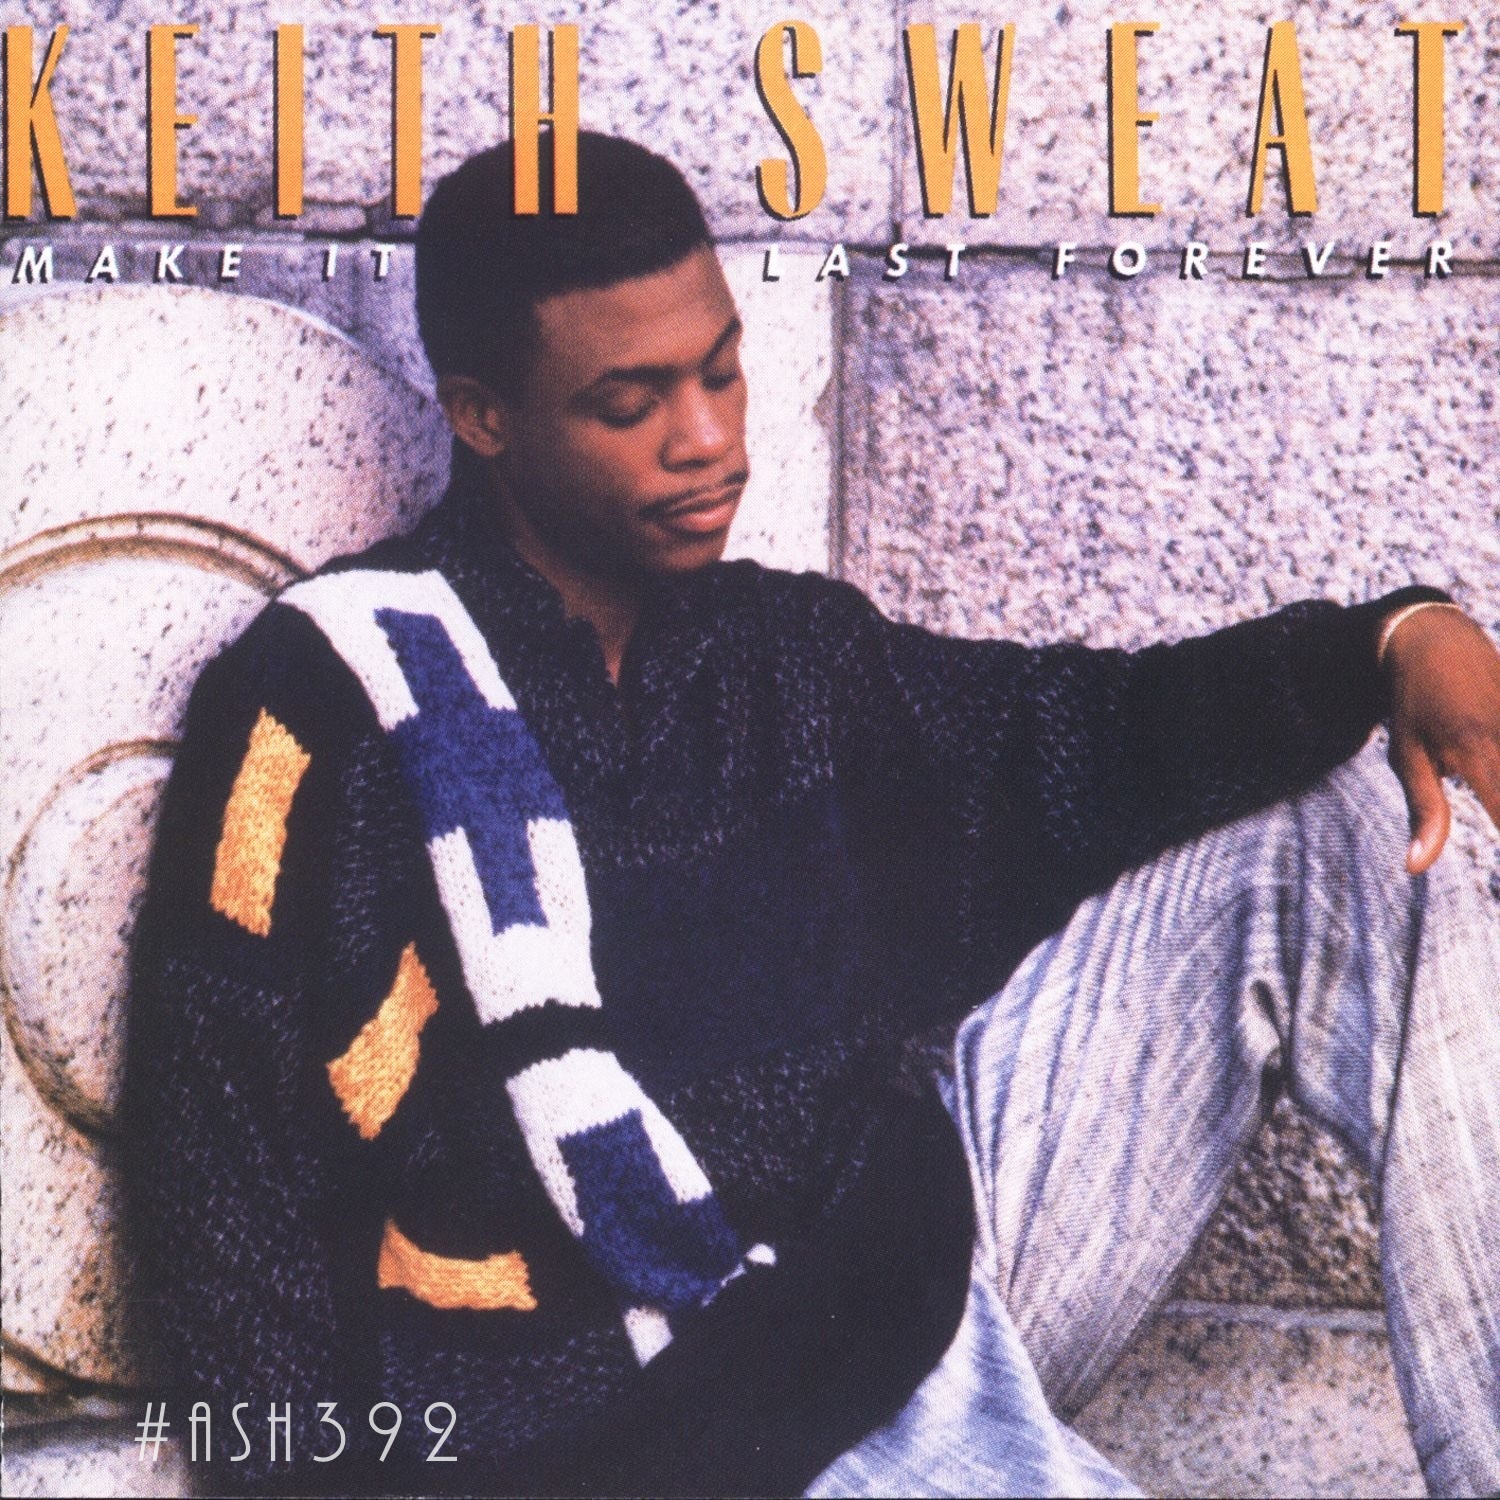 Keith Sweat and Jacci McGhee - Make It Last Forever